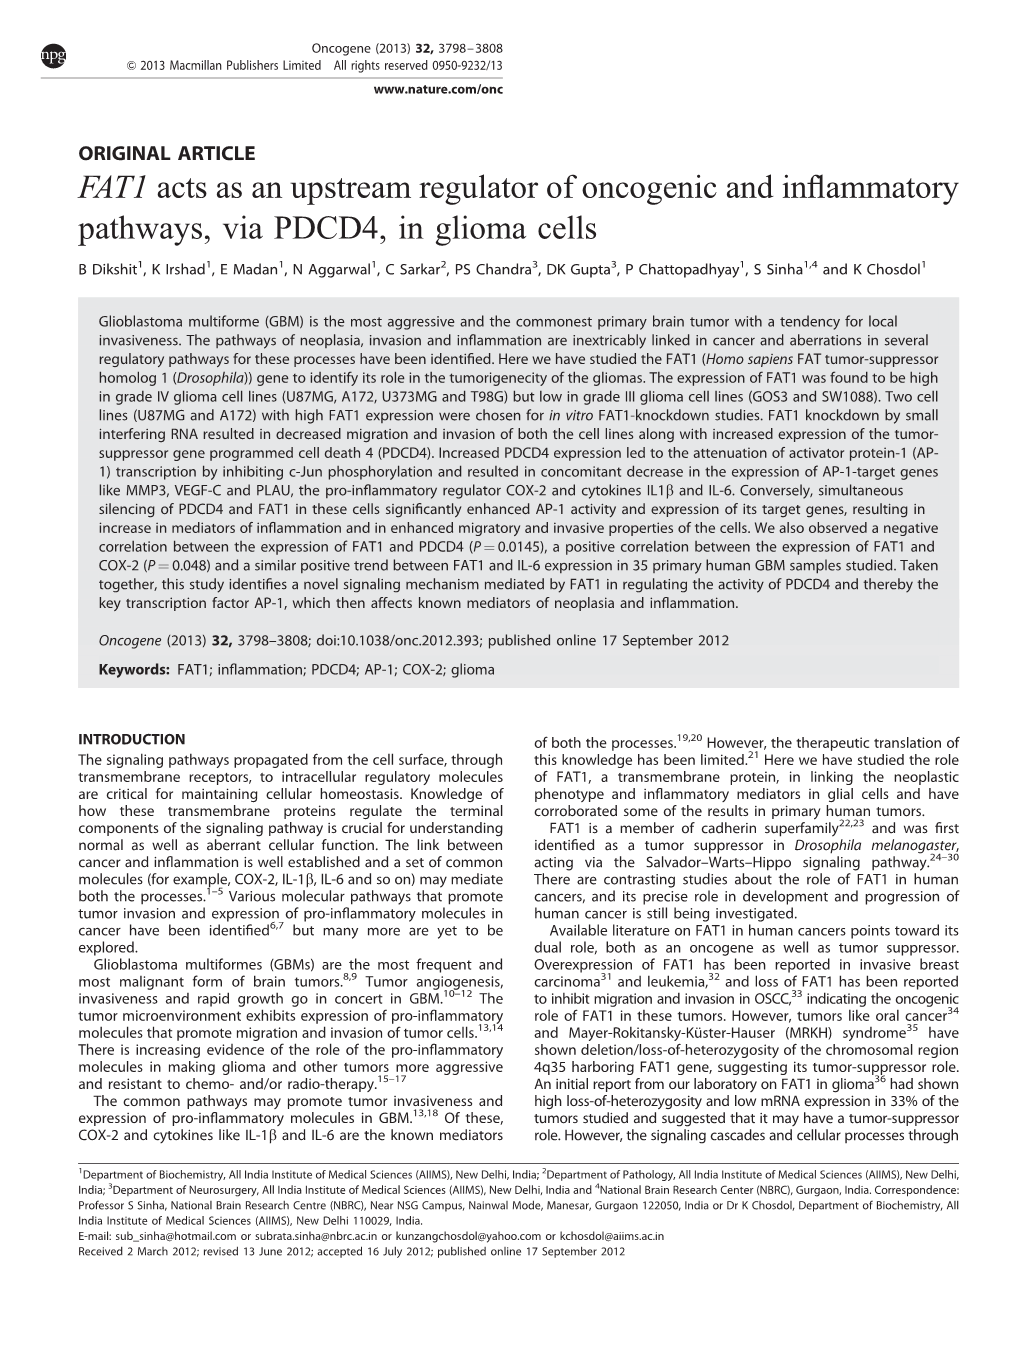 FAT1 Acts As an Upstream Regulator of Oncogenic and Inﬂammatory Pathways, Via PDCD4, in Glioma Cells